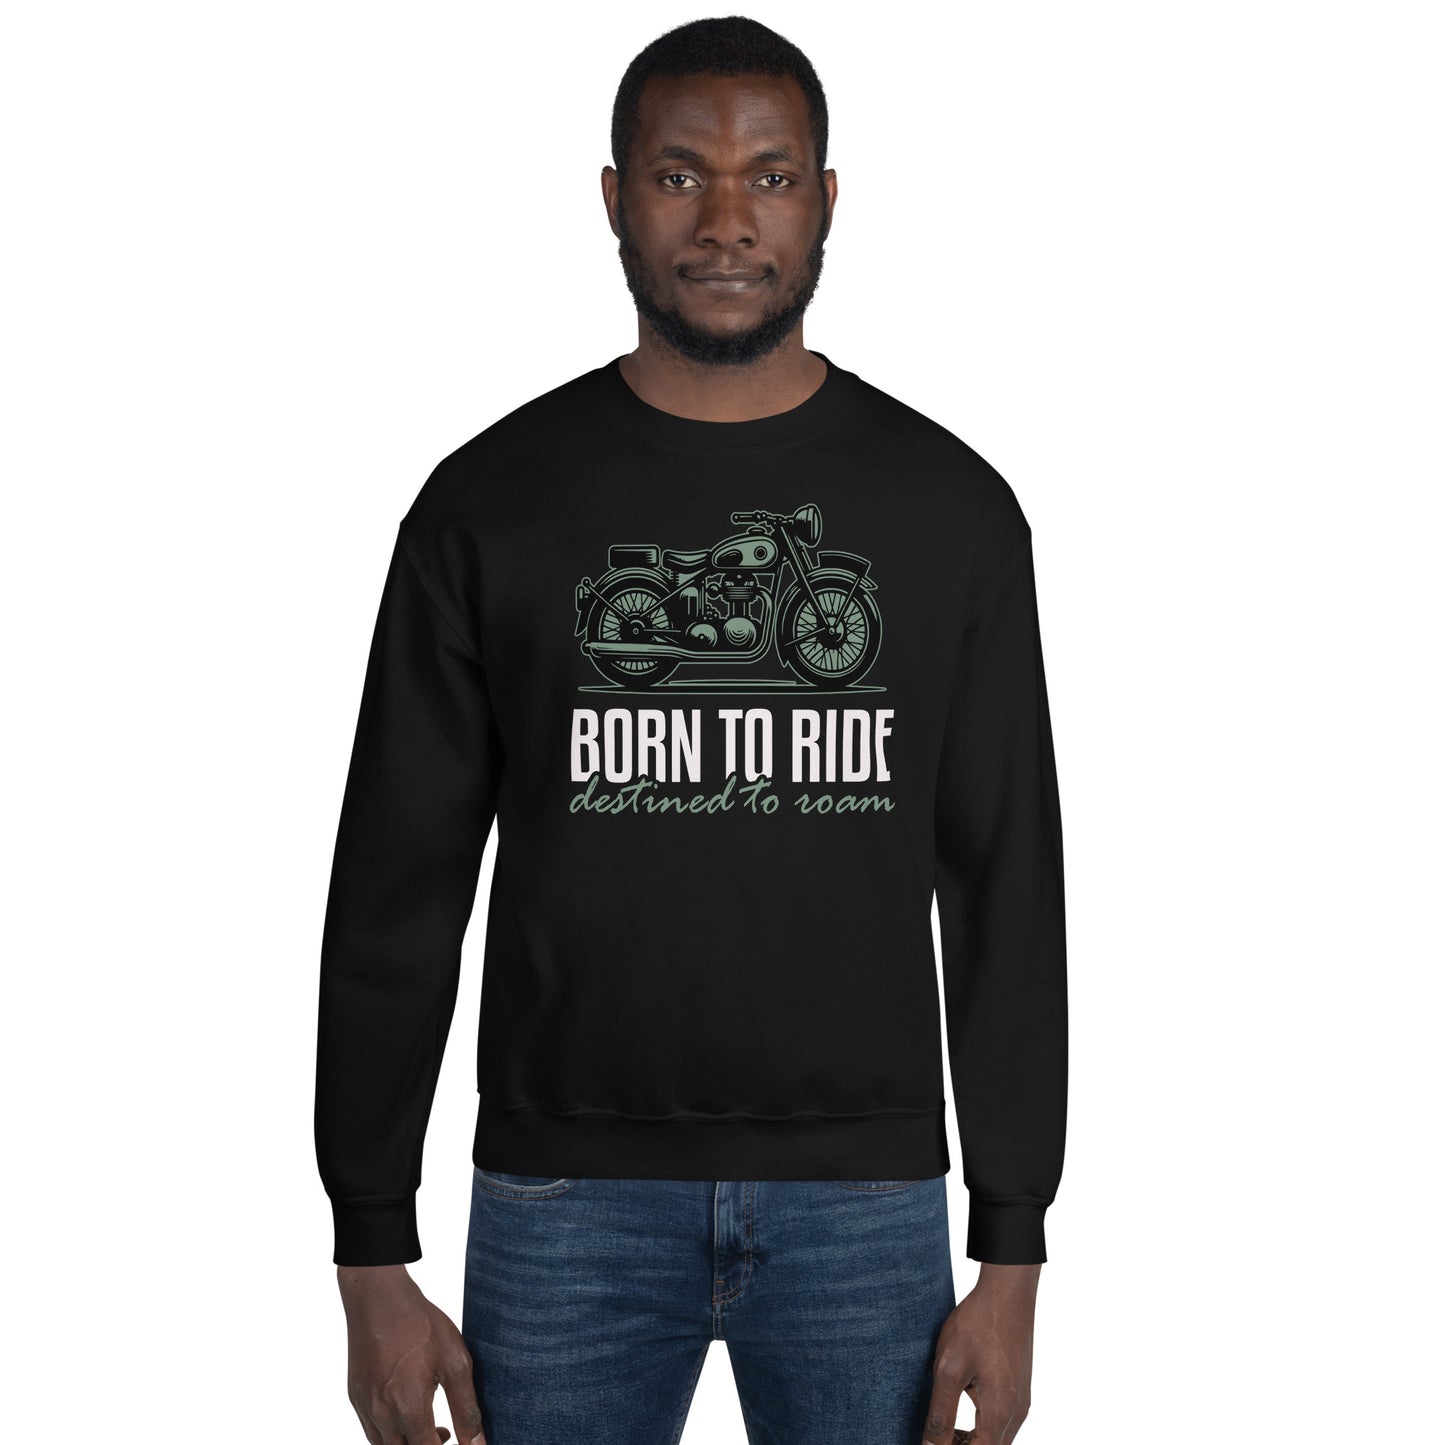 Born to Ride - Destined to Roam Unisex-Pullover